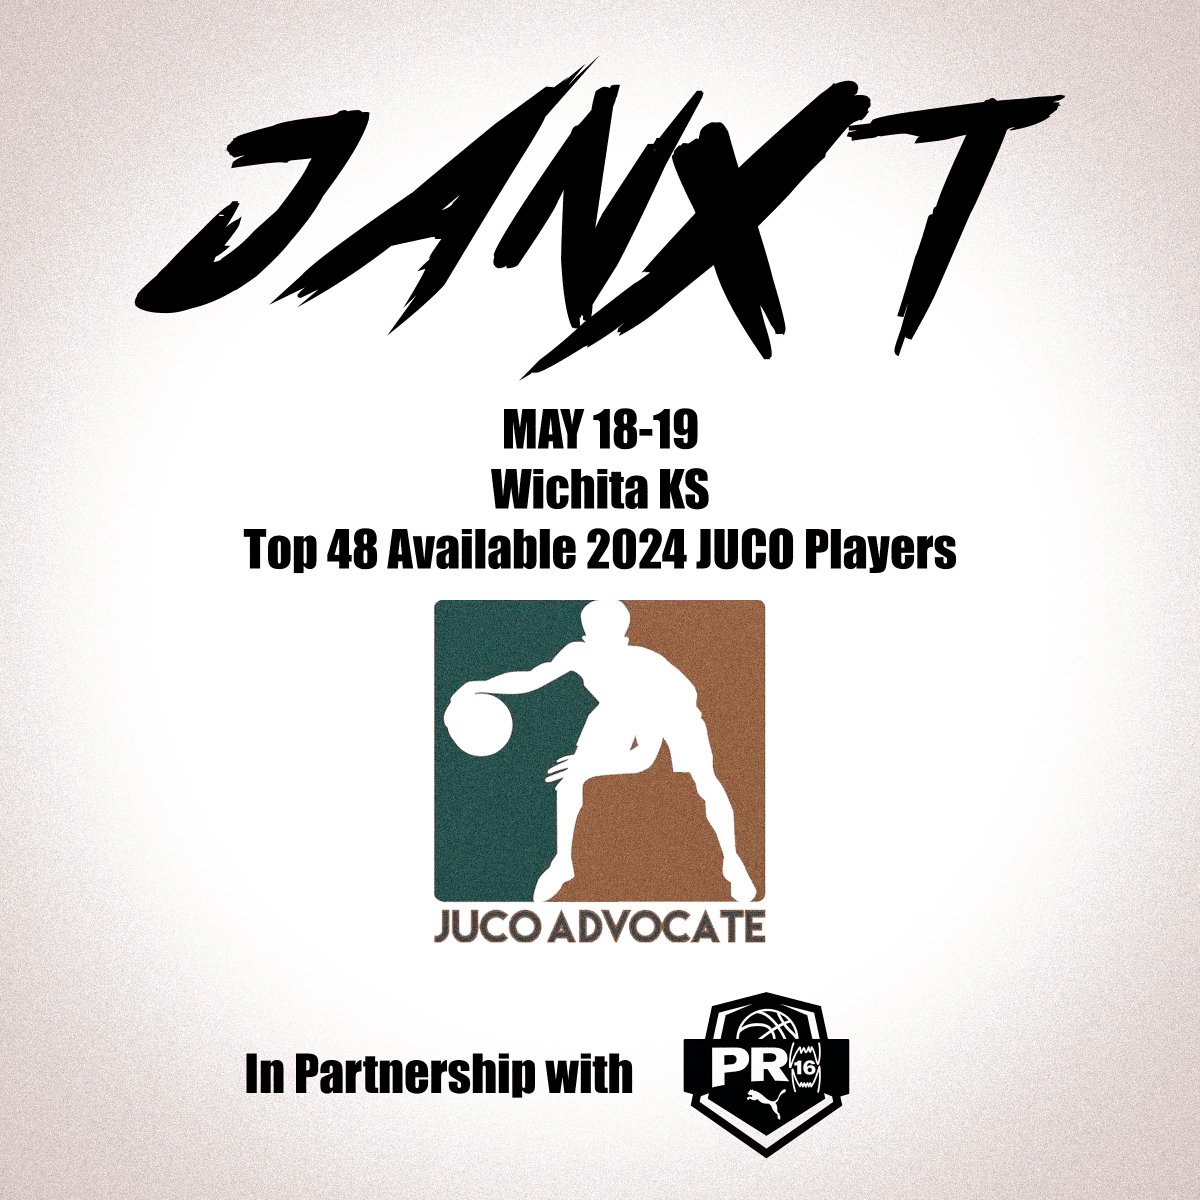 The next JANXT Invite goes to 6'0 Sean Burress of Sauk Valley. In partnership with @NxtProHoops @PRO16League and @PUMAHoops May 18-19 Wichita KS Stay tuned for more invitations and exciting updates!!!